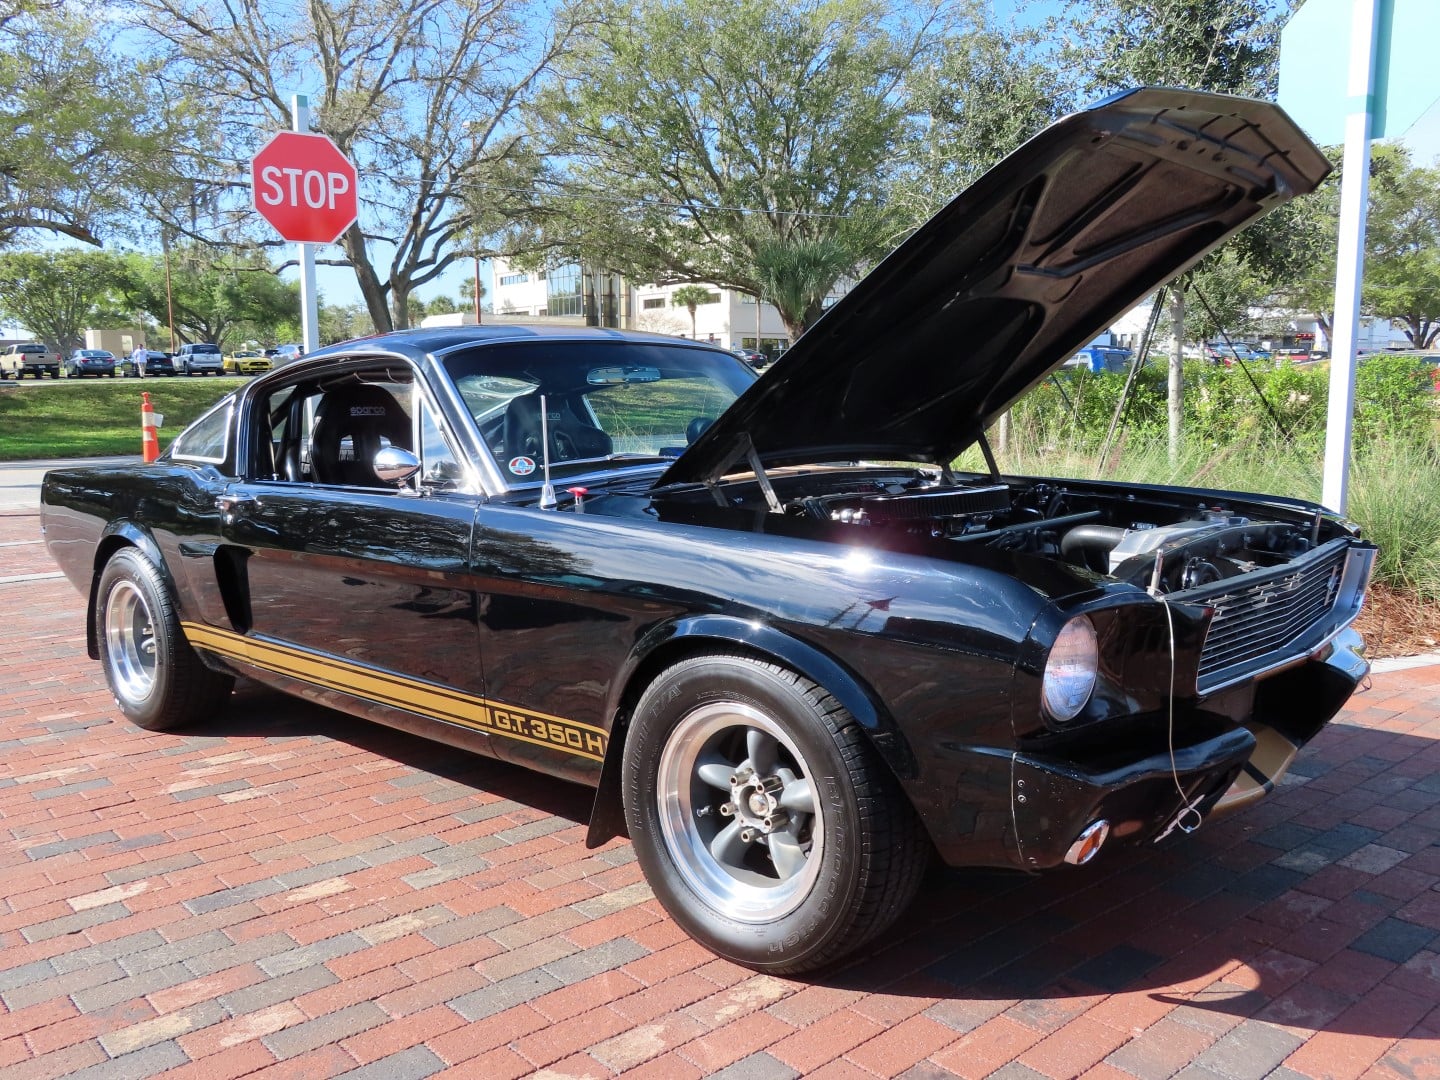 MID-FLORIDA MUSTANG CLUB ROUNDUP DOMINATES DOWNTOWN LONGWOOD